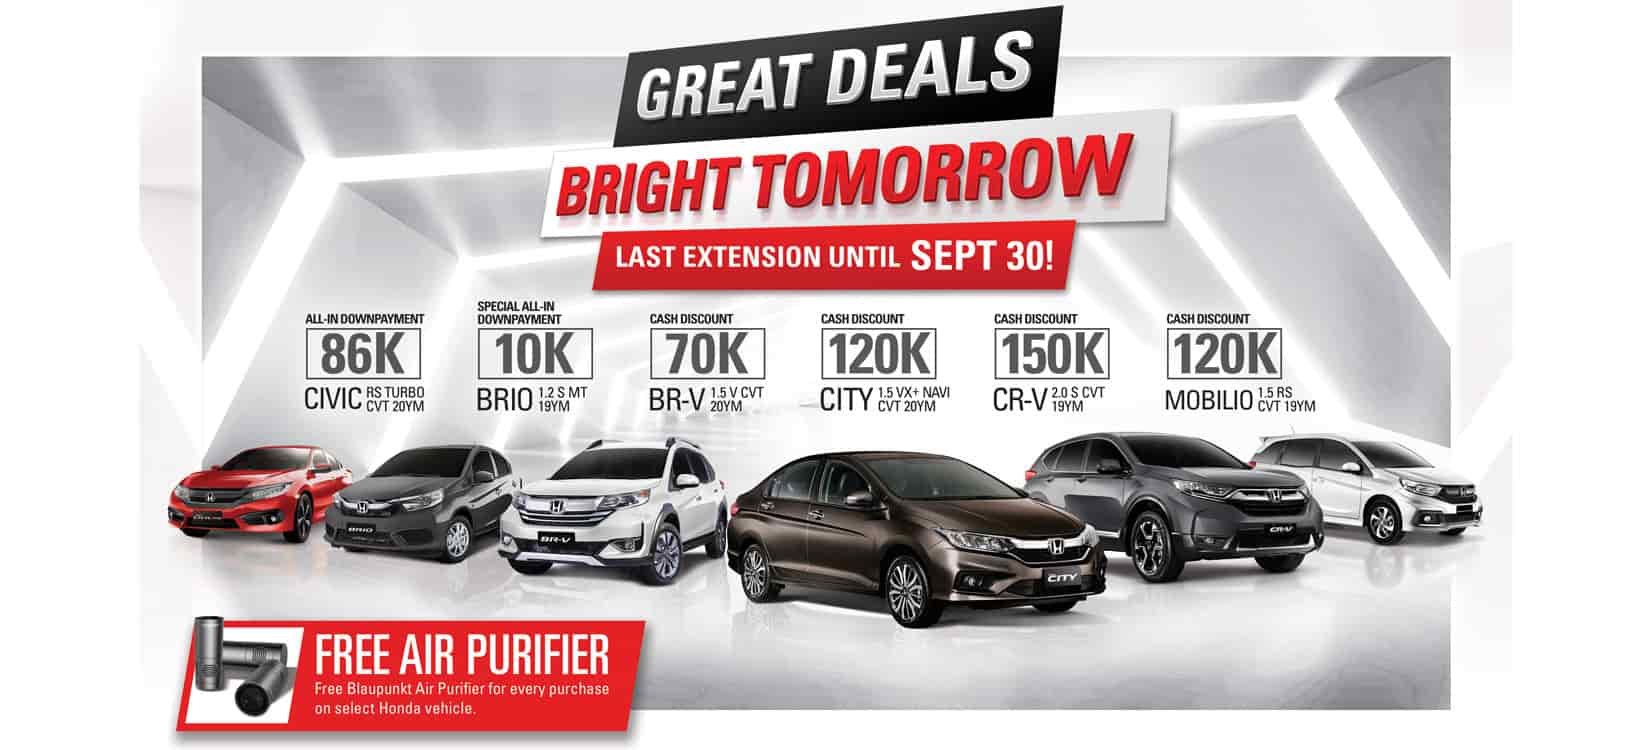 Honda Cars Philippines Honda Announces Final Extension Of Huge Cash Discounts Other Great Deals This September